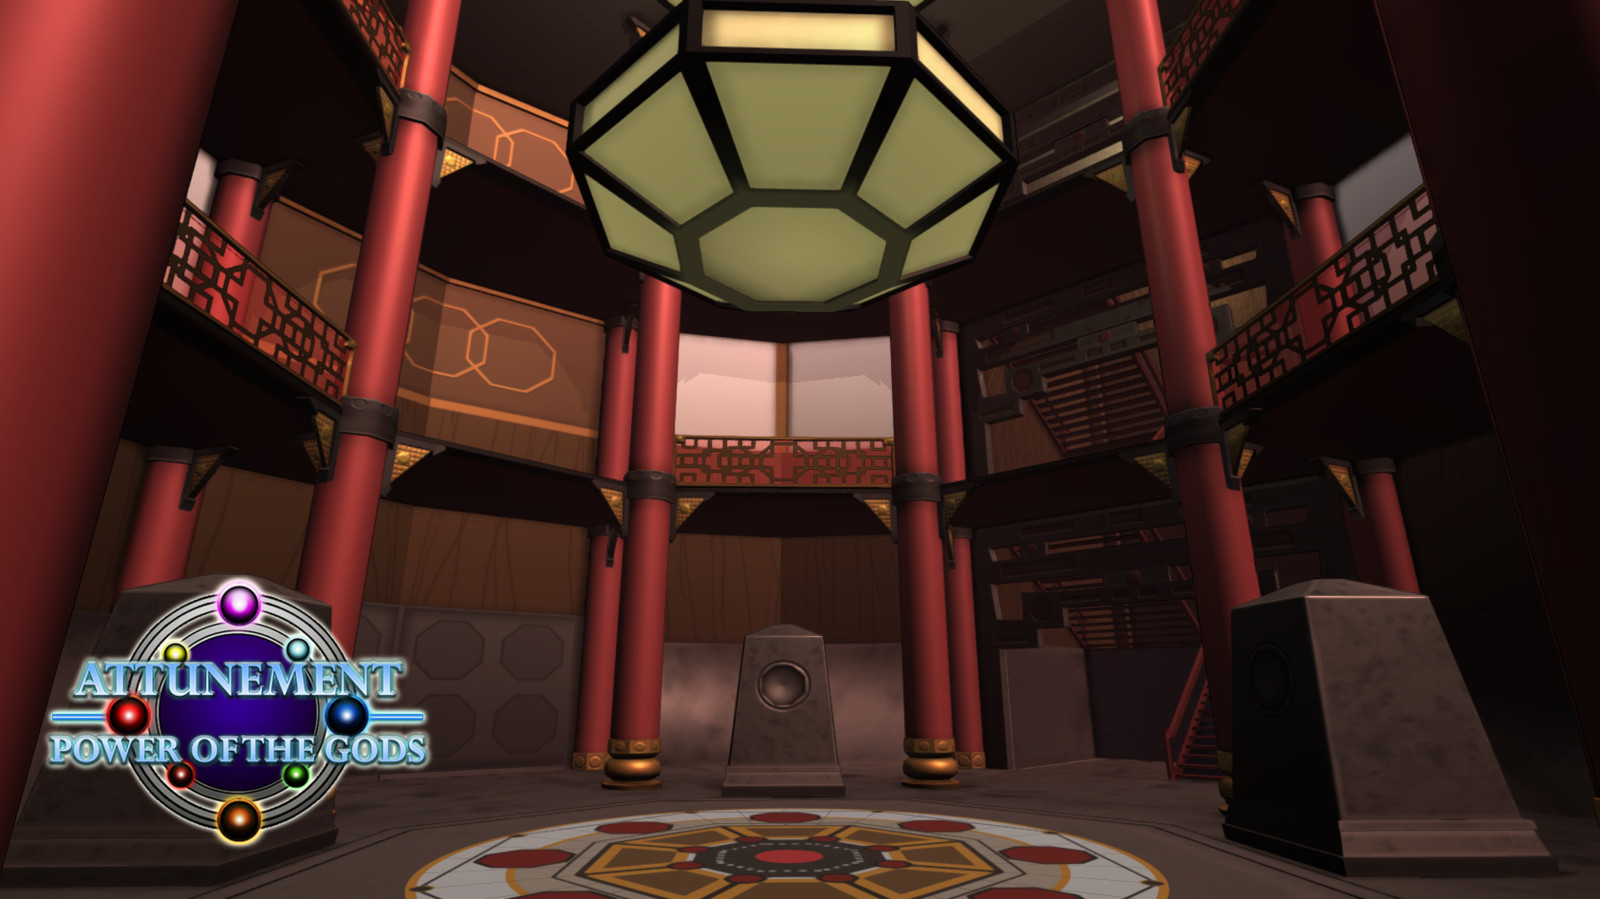 In-game capture of Crimson Tower level.
Level designed and developed during my time as a contract environment artist on Attunement: Power of the Gods, an elemental arena versus game. Crimson Tower, an arena inspired by the architecture of feudal Japan.